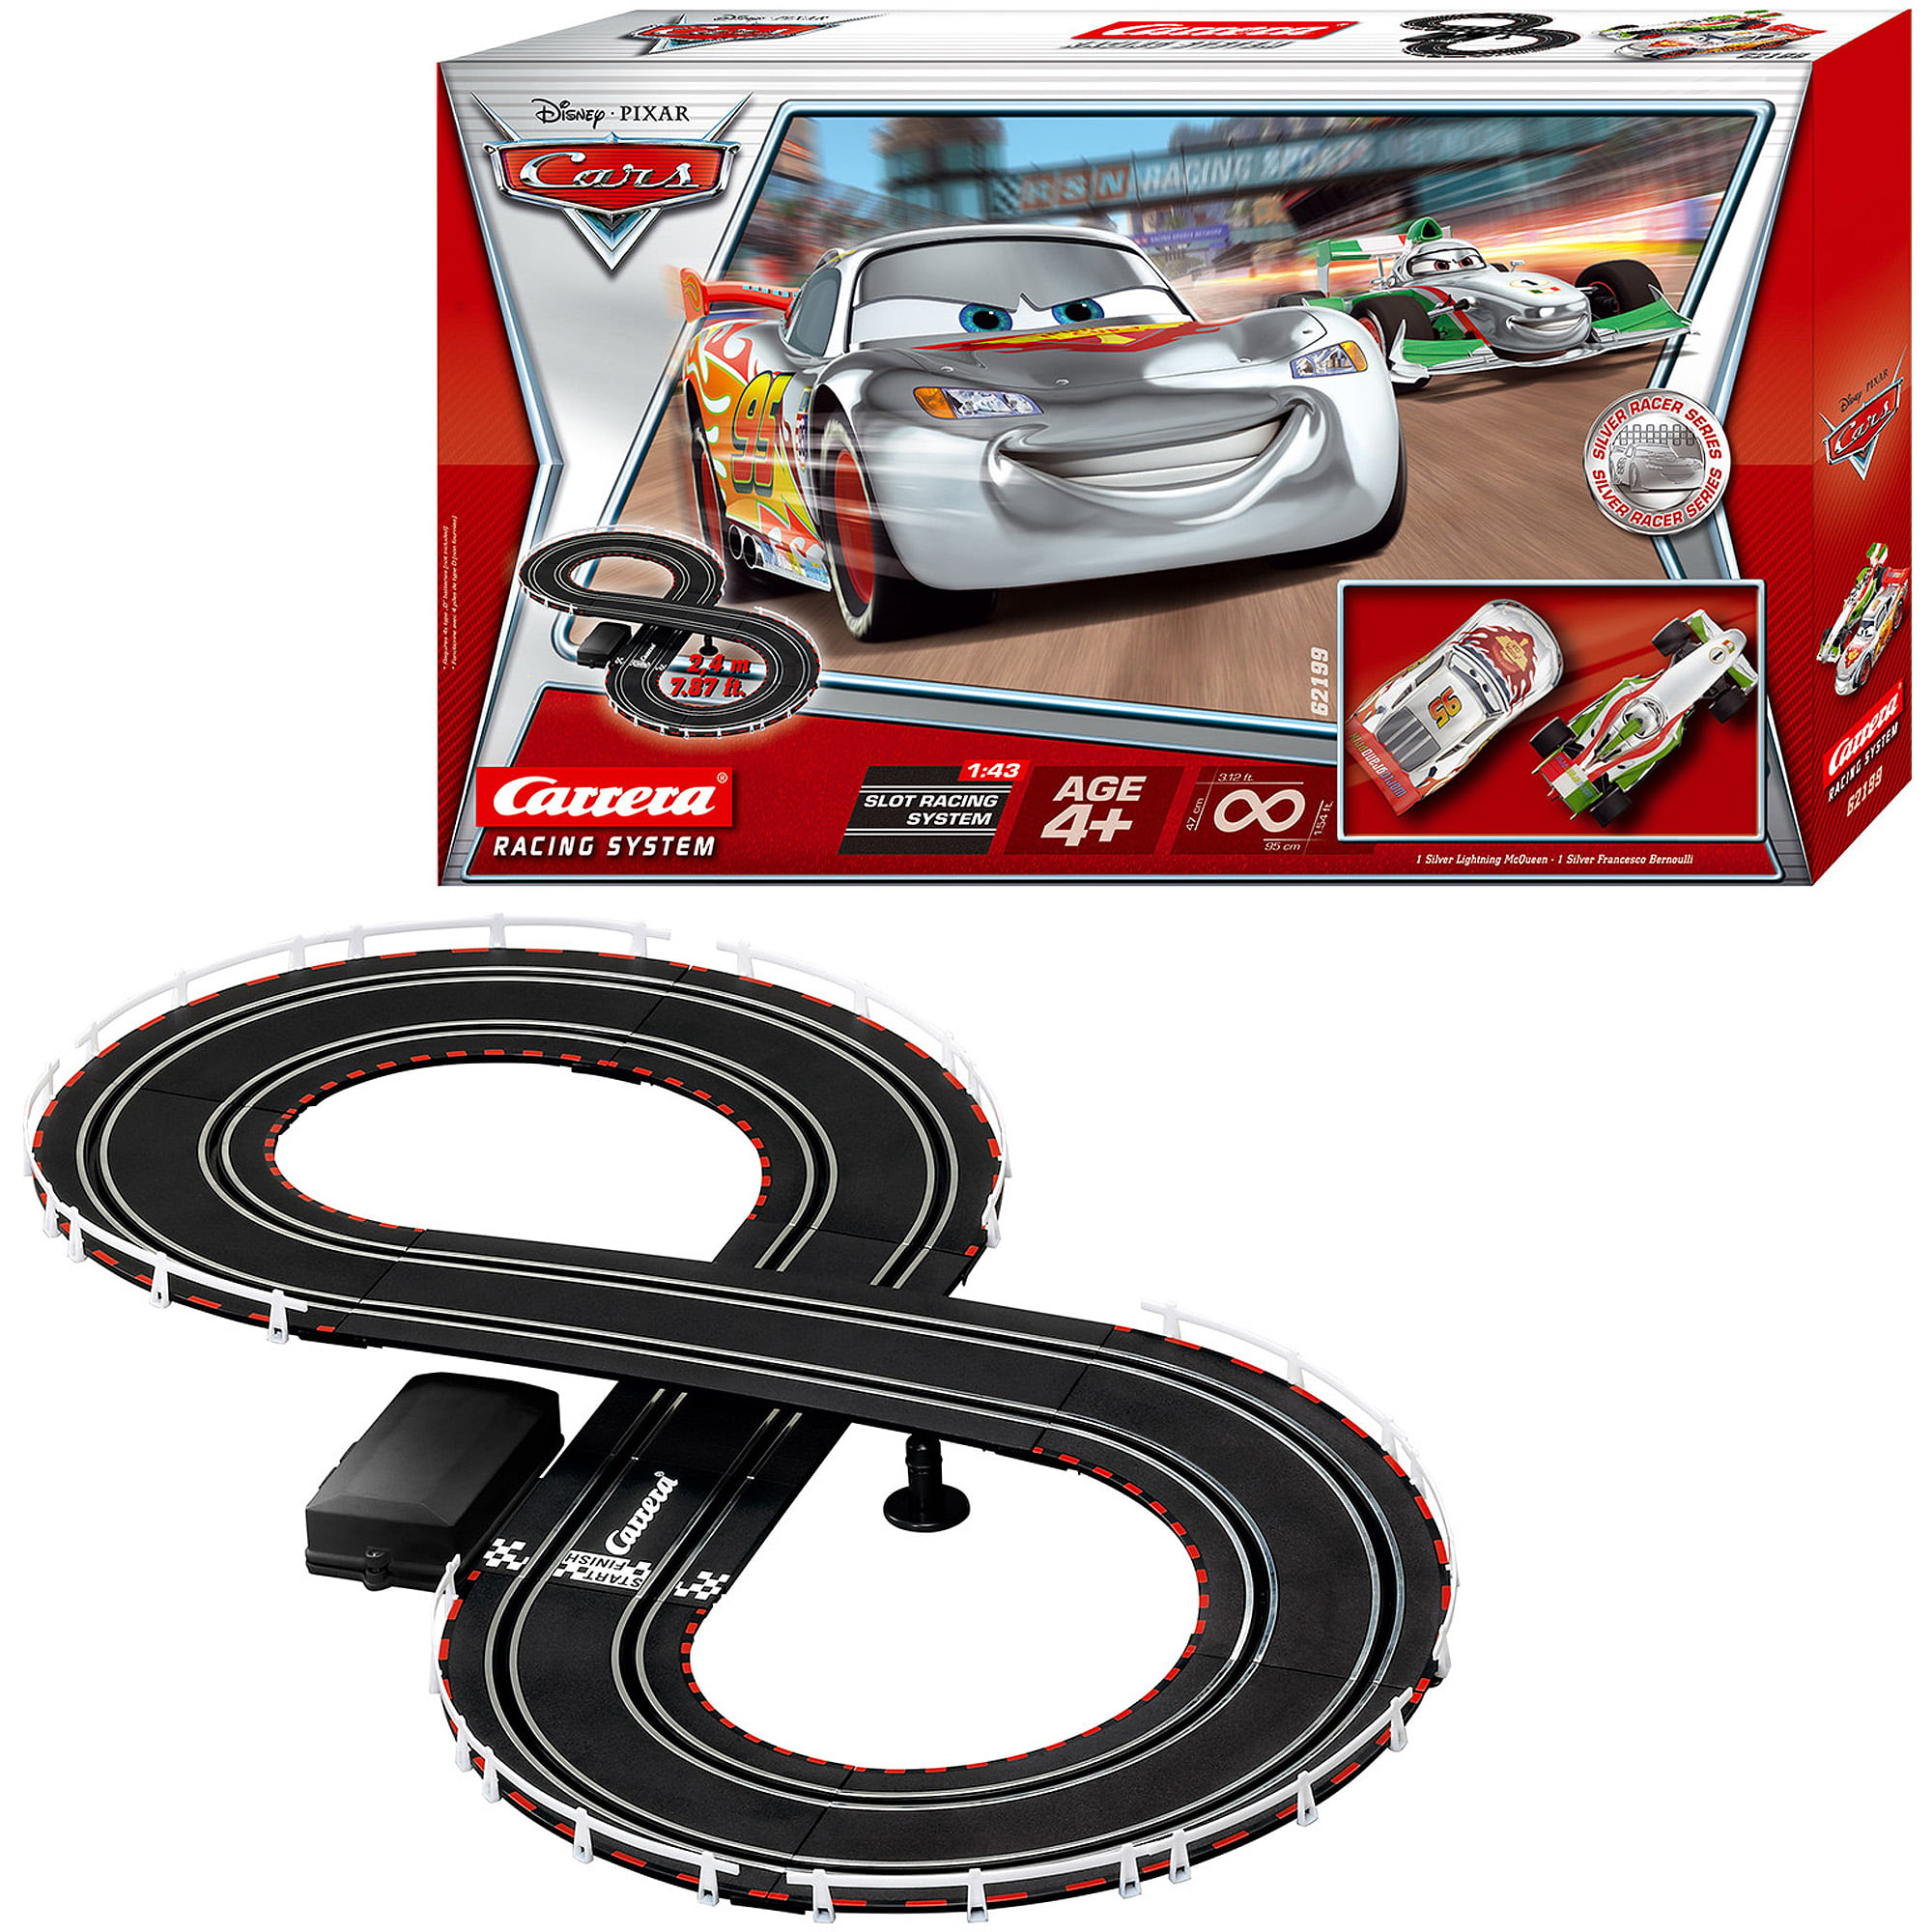  Lightning McQueen Slot Cars Race Track Sets RC Car Toys Remote  Control Race Car Track Set 1:43 Scale and 2 Controller Dual Racing Birthday  Gifts for Children Boys and Girls 3+